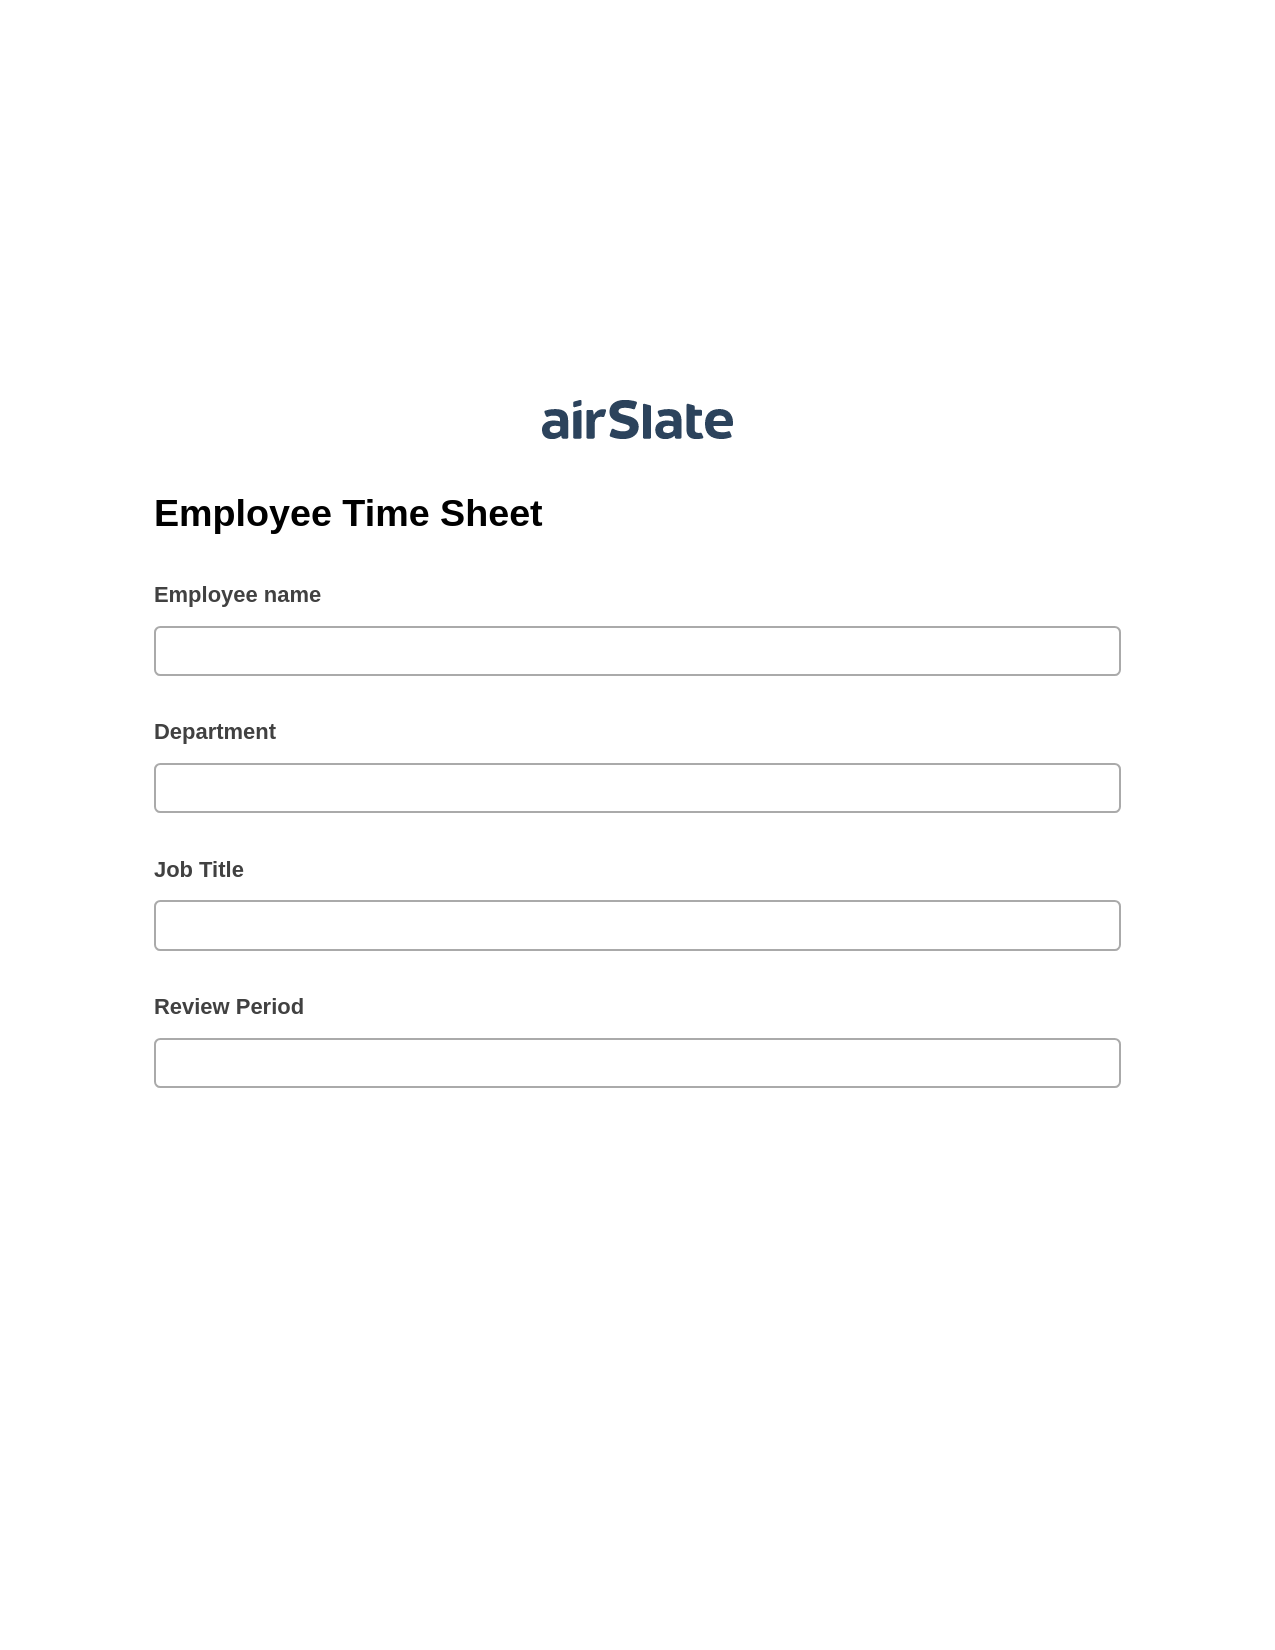 Multirole Employee Time Sheet Pre-fill Dropdowns from Excel Bot, Update MS Dynamics 365 Record Bot, Export to WebMerge Bot